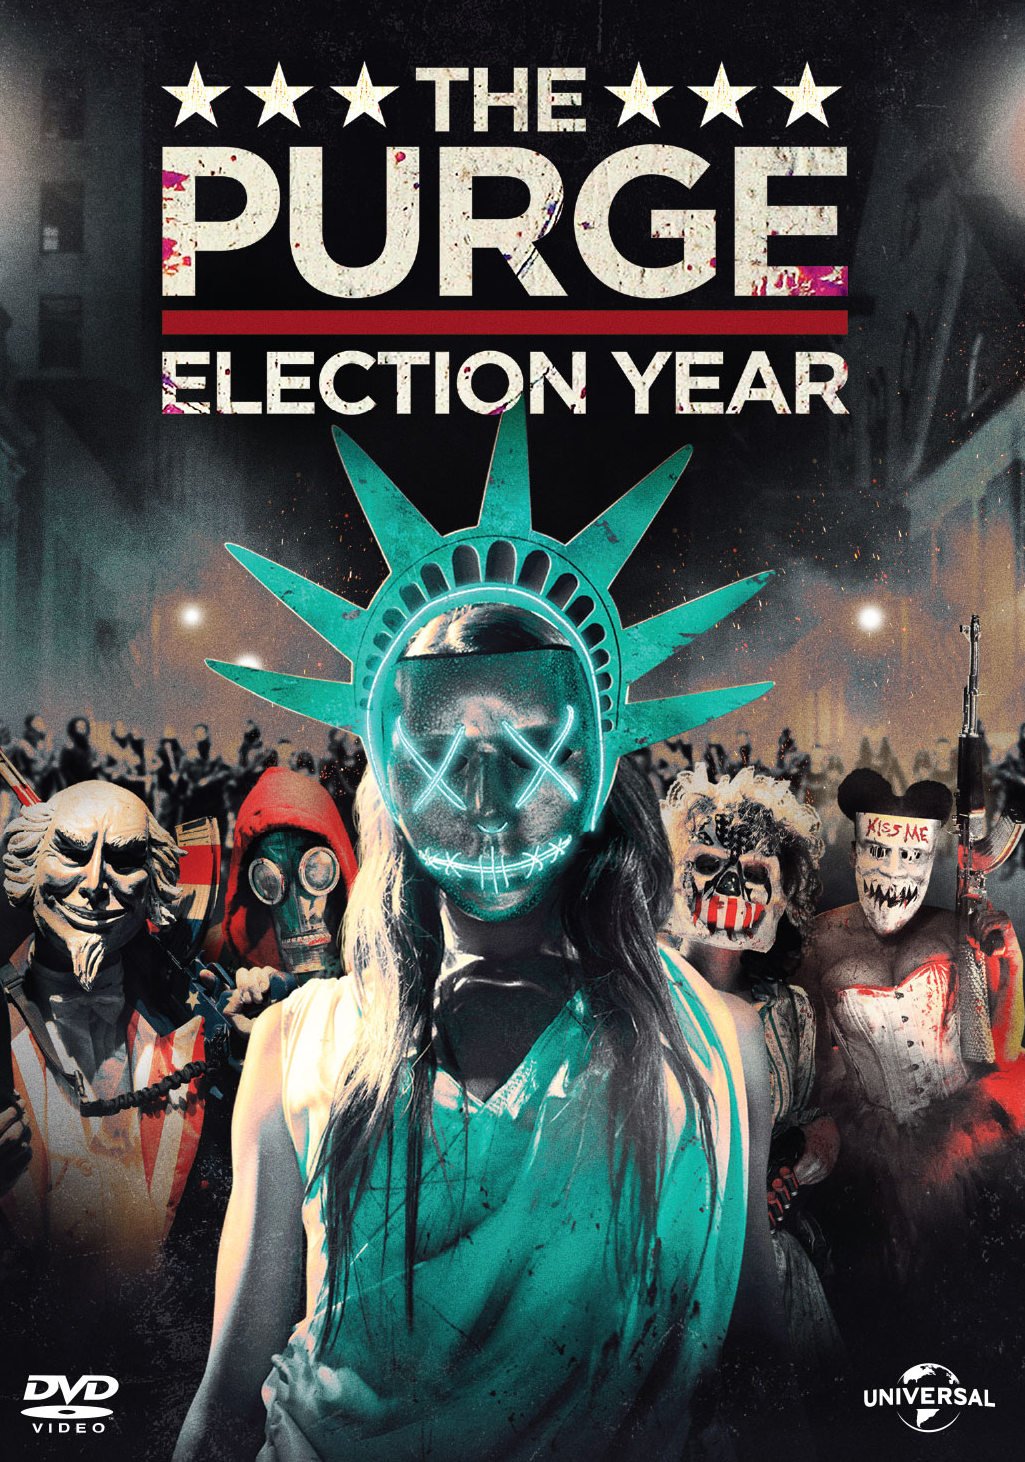 the-purge-election-year-movie-purchase-or-watch-online